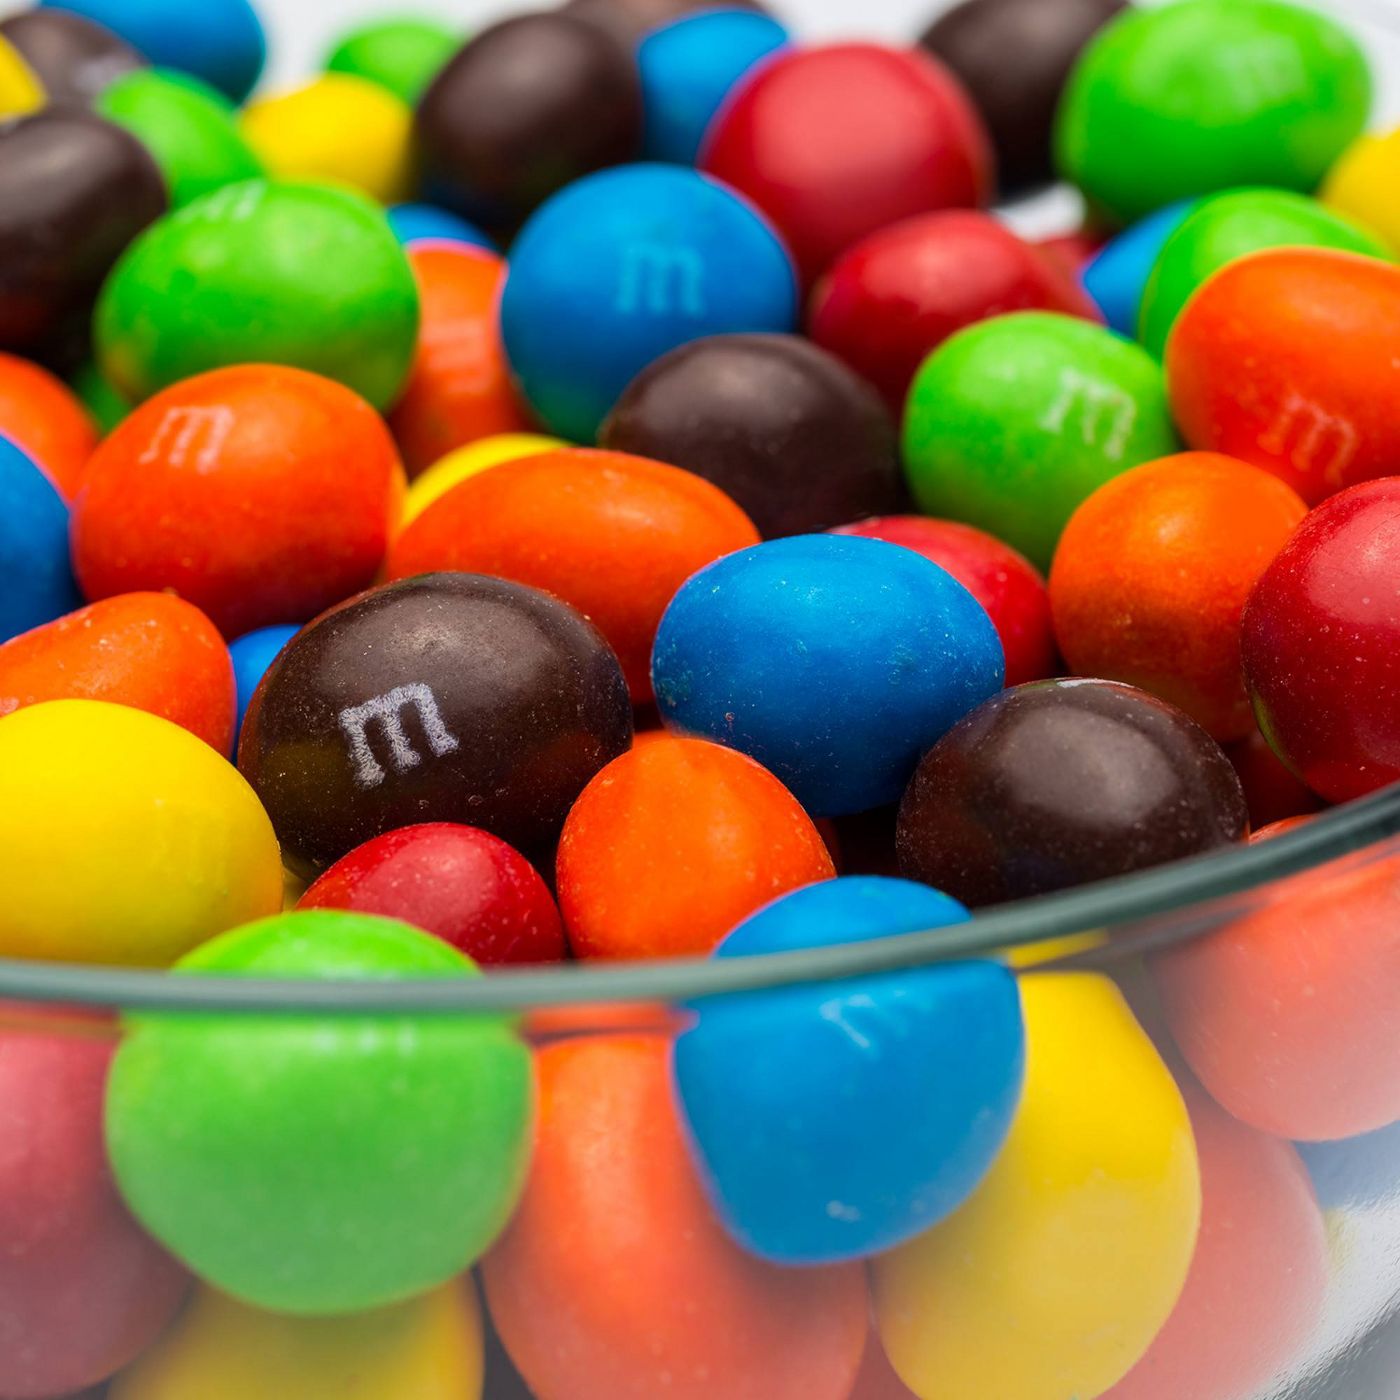 M&Ms Party Size, Peanut - 38oz - Water Butlers